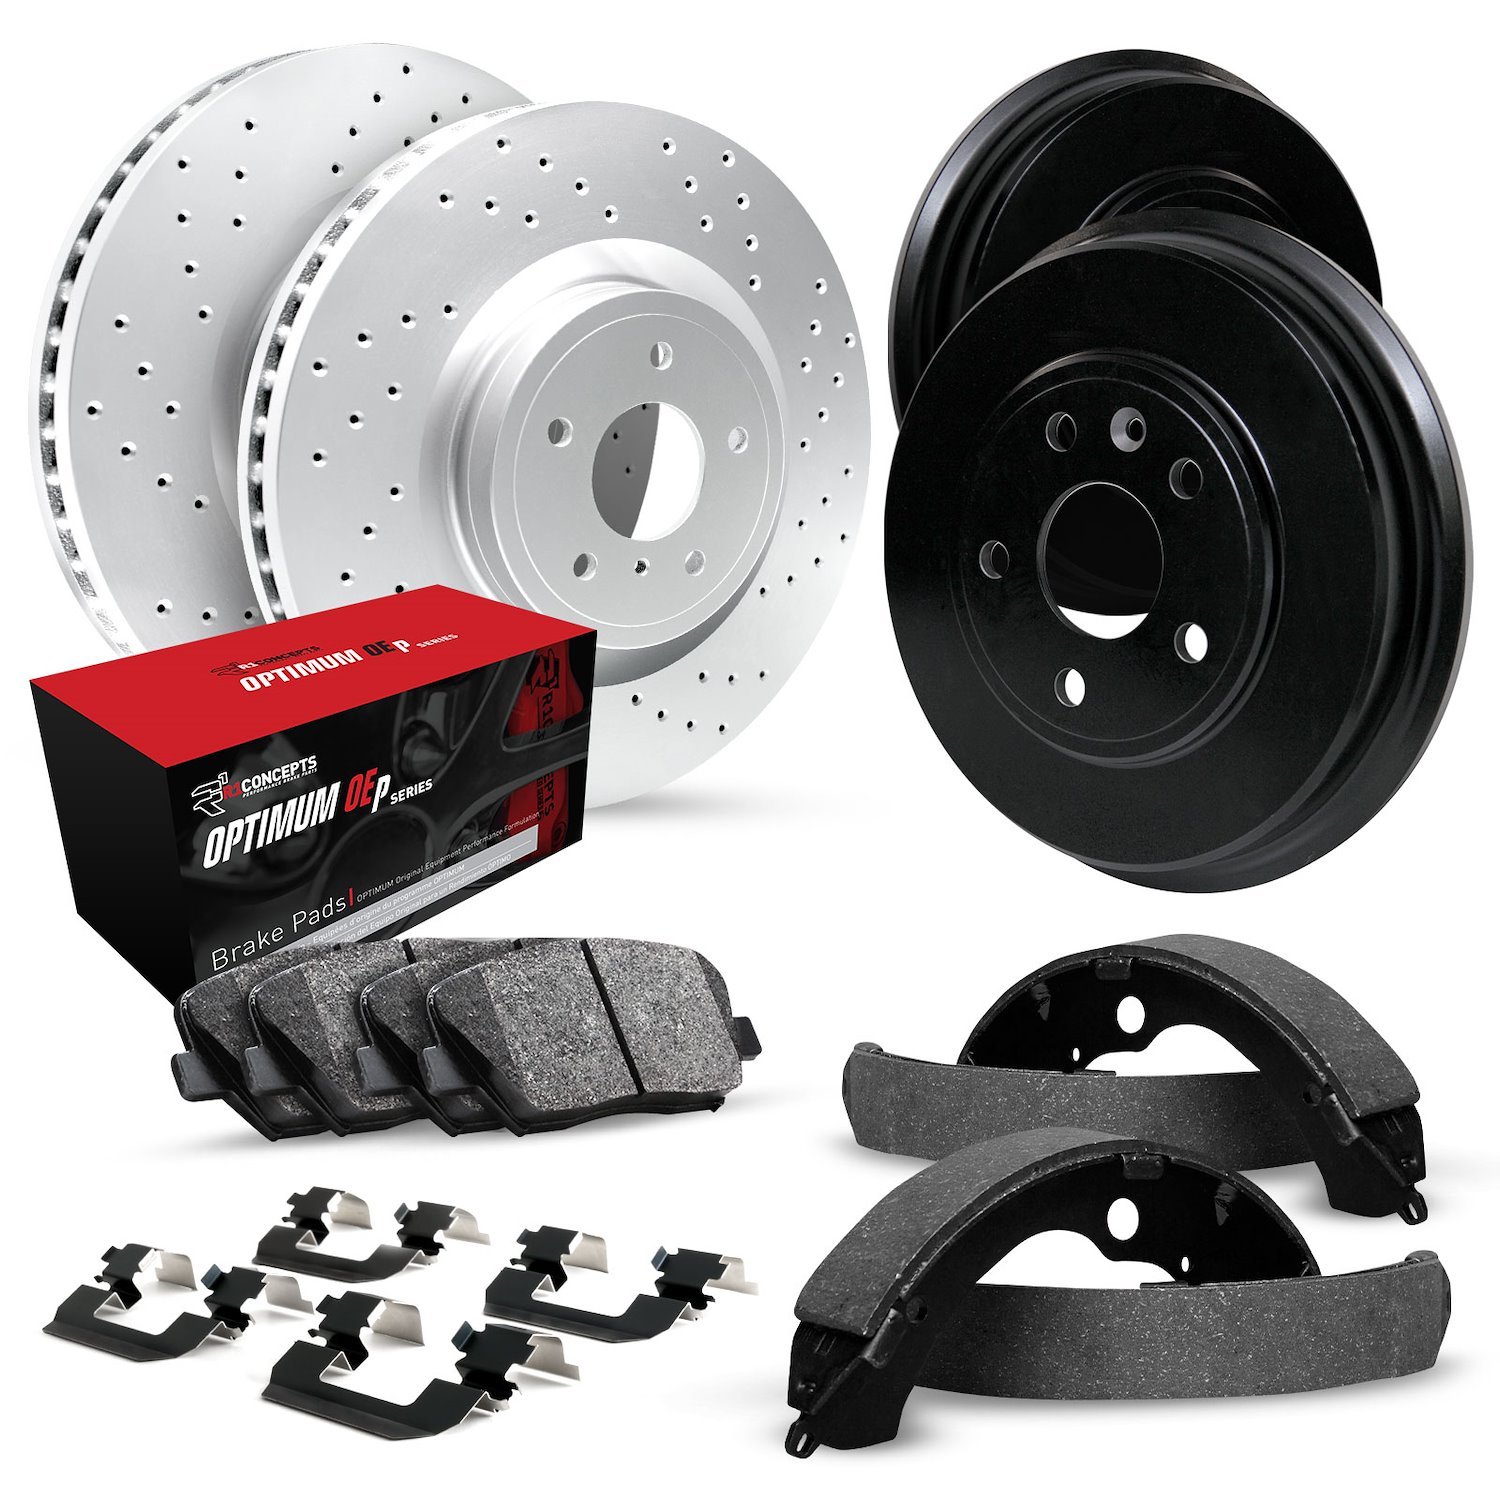 GEO-Carbon Drilled Brake Rotor & Drum Set w/Optimum OE Pads, Shoes, & Hardware, 1988-1991 Acura/Honda, Position: Front & Rear